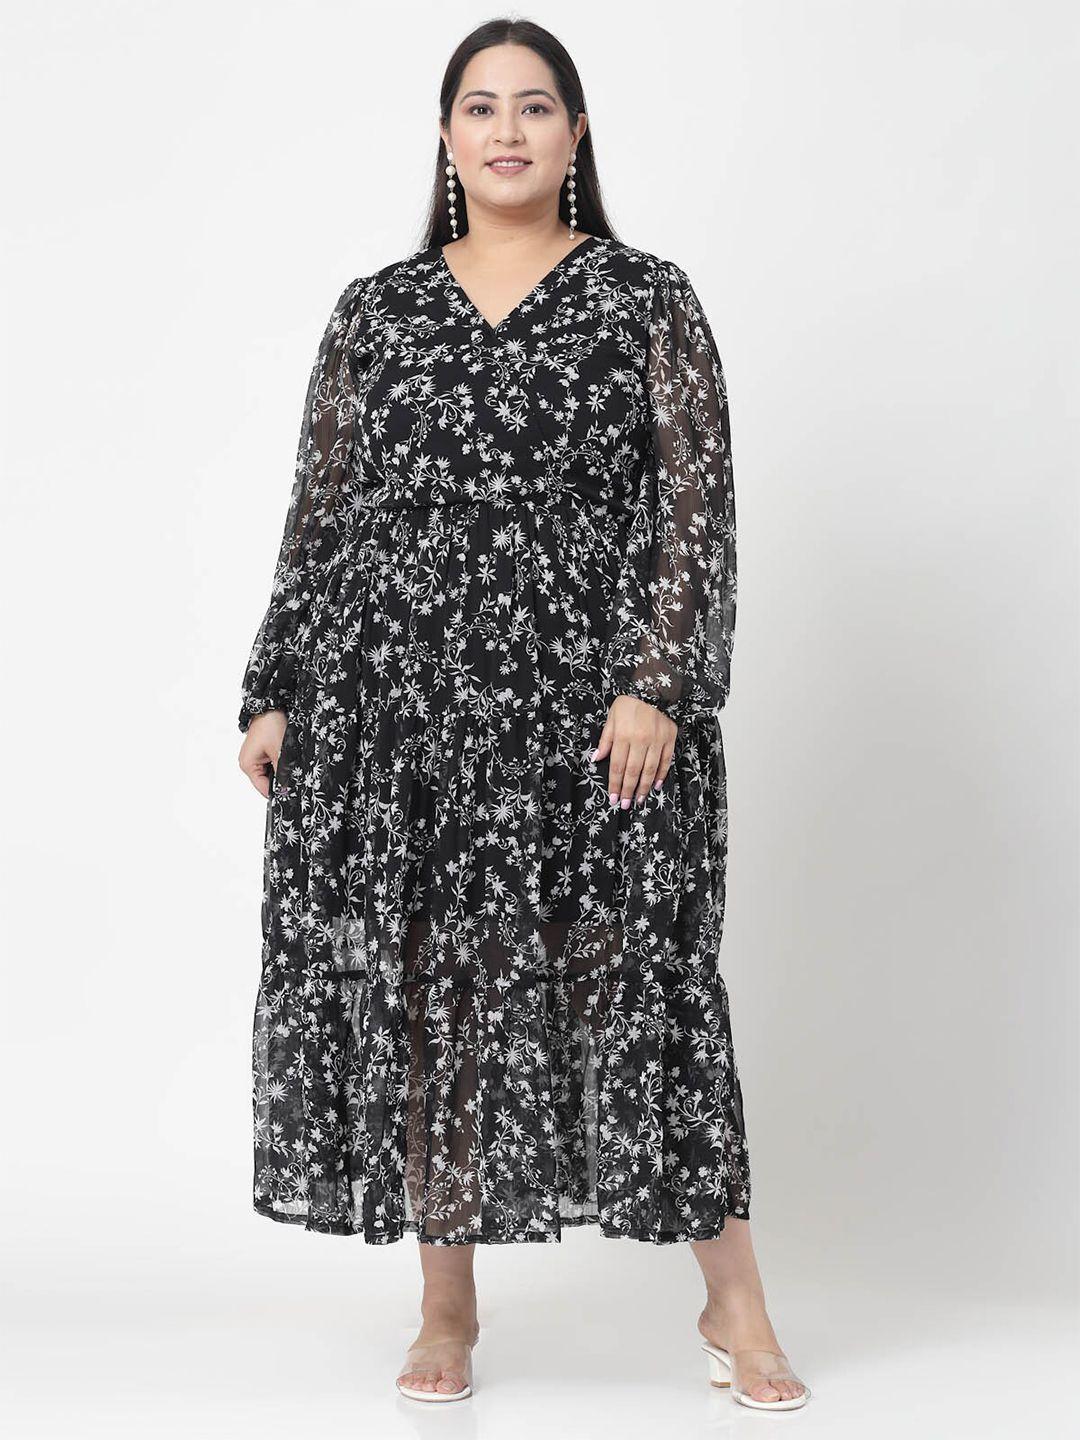 pluss plus size black & white floral printed v-neck puff sleeves fit & flare dress